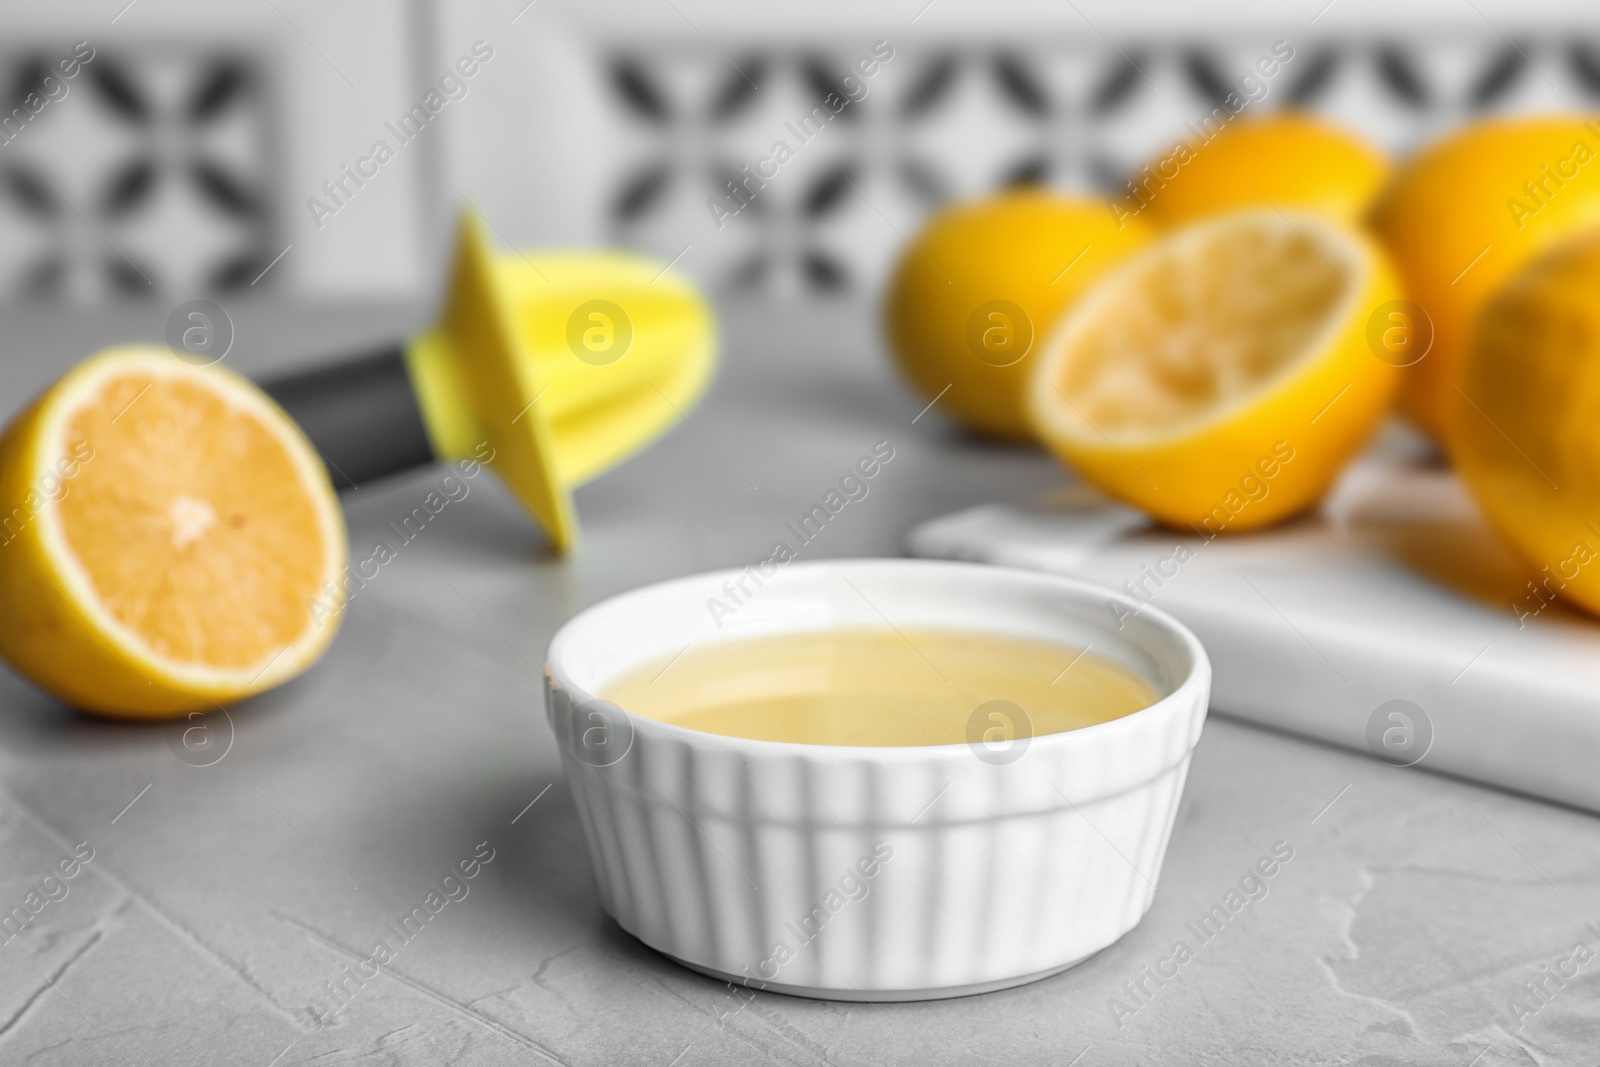 Photo of Freshly squeezed lemon juice in bowl on table